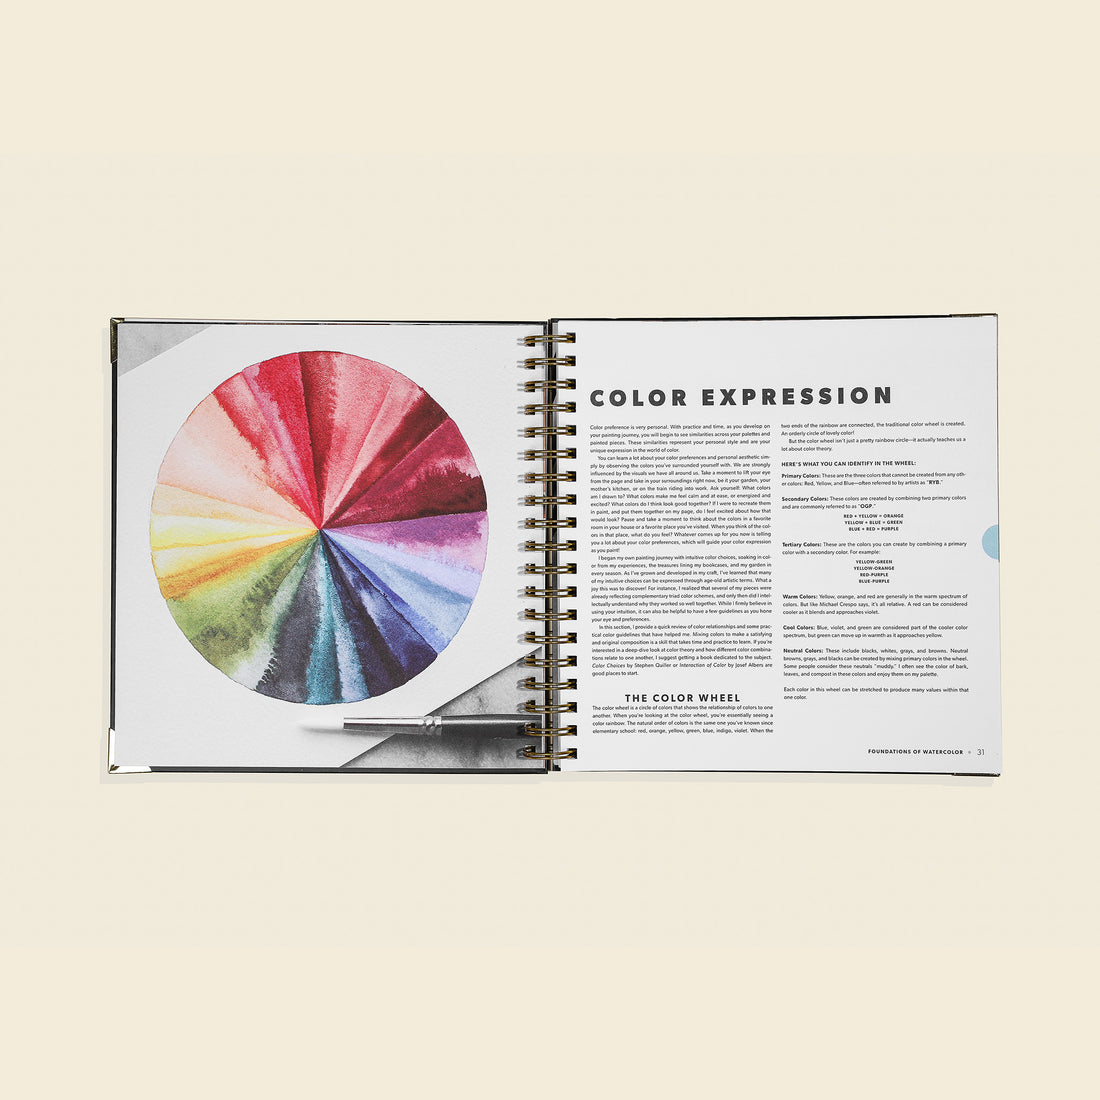 Modern Watercolor Botanicals: A Creative Workshop in Watercolor, Gouache, & Ink [Book]